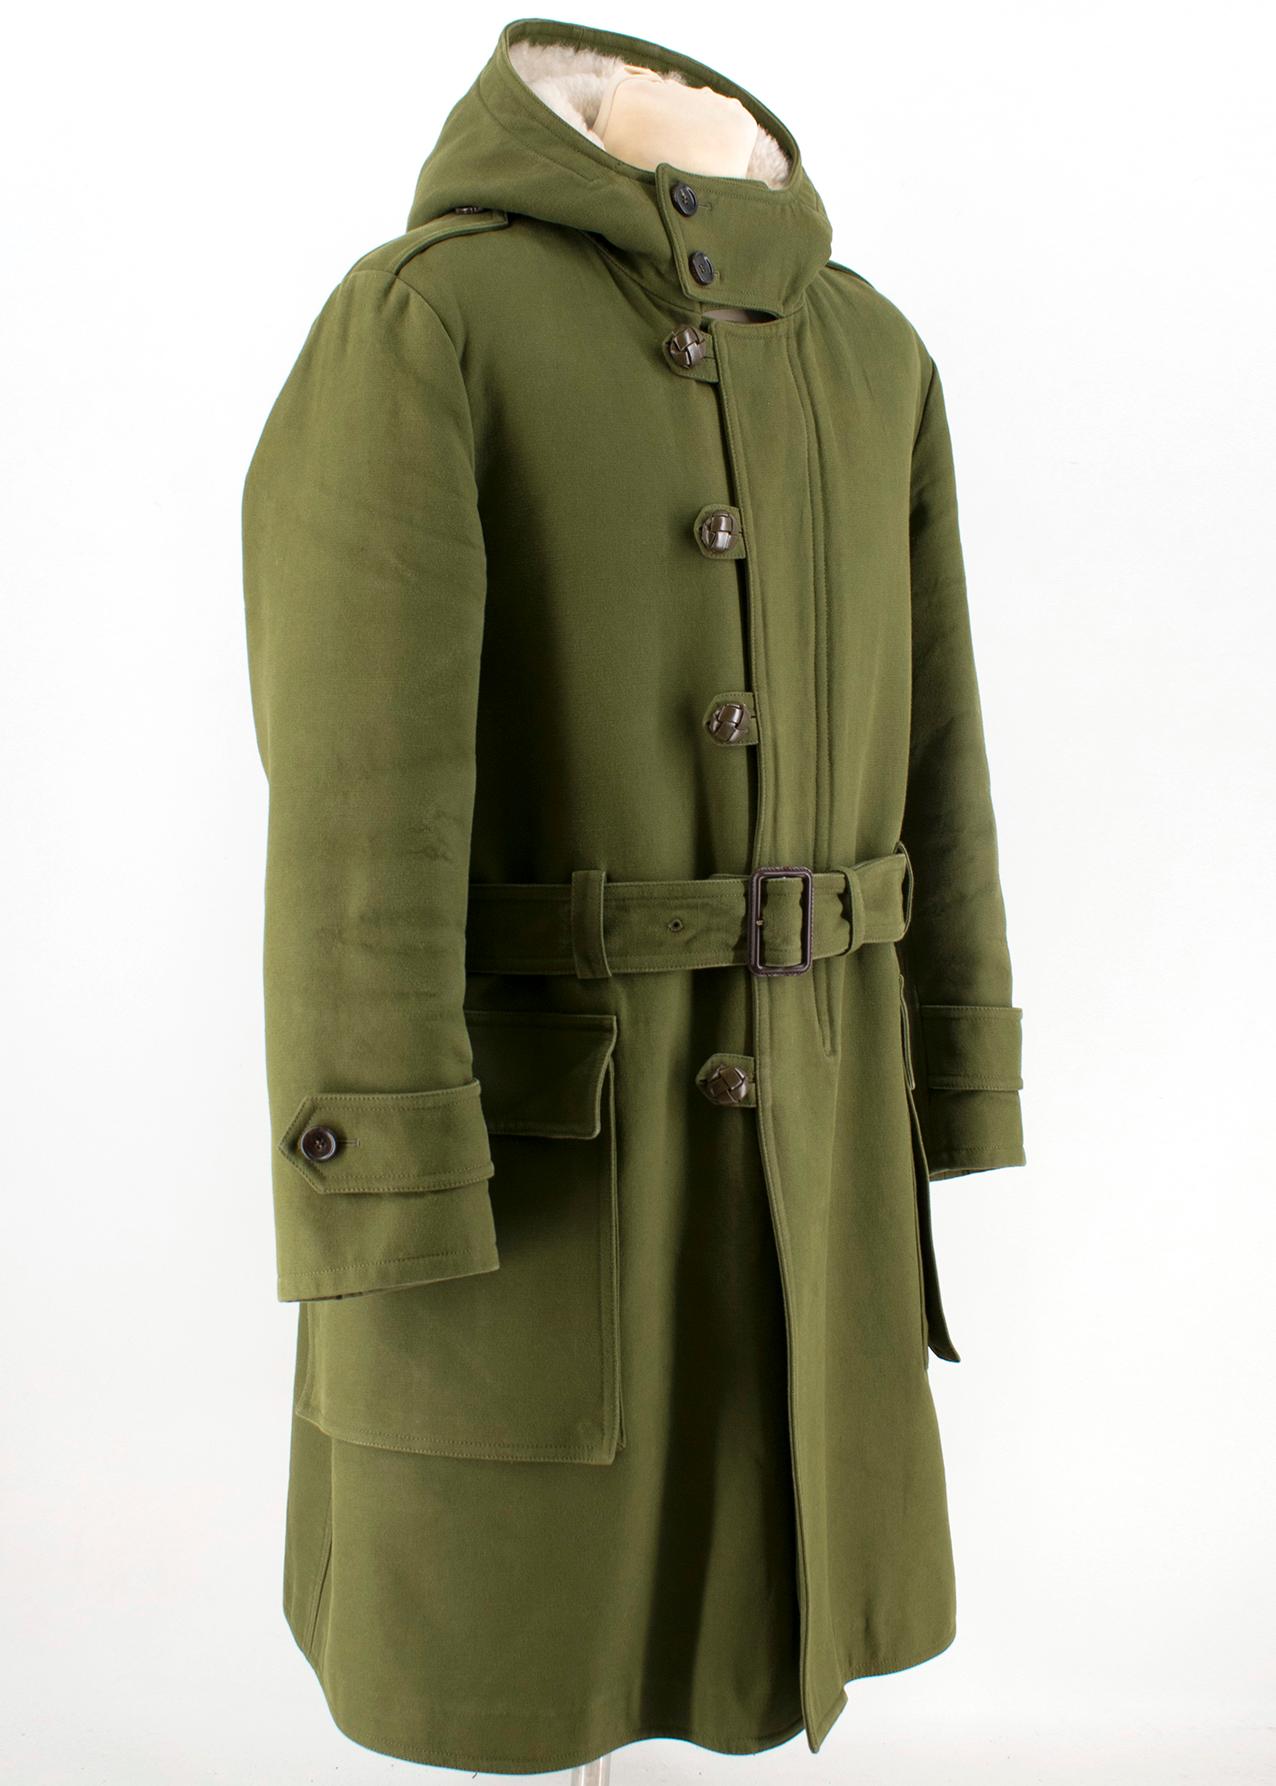 Gucci Shearling-Lined Green Canvas Parka

- Heavyweight coat 
- Military green wool & cotton-blend cotton canvas. 
- Lined with shearling. 
- Fixed hood. 
- Zipper and button closure. 
- Woven leather buttons. 
- Self-belt with leather-covered